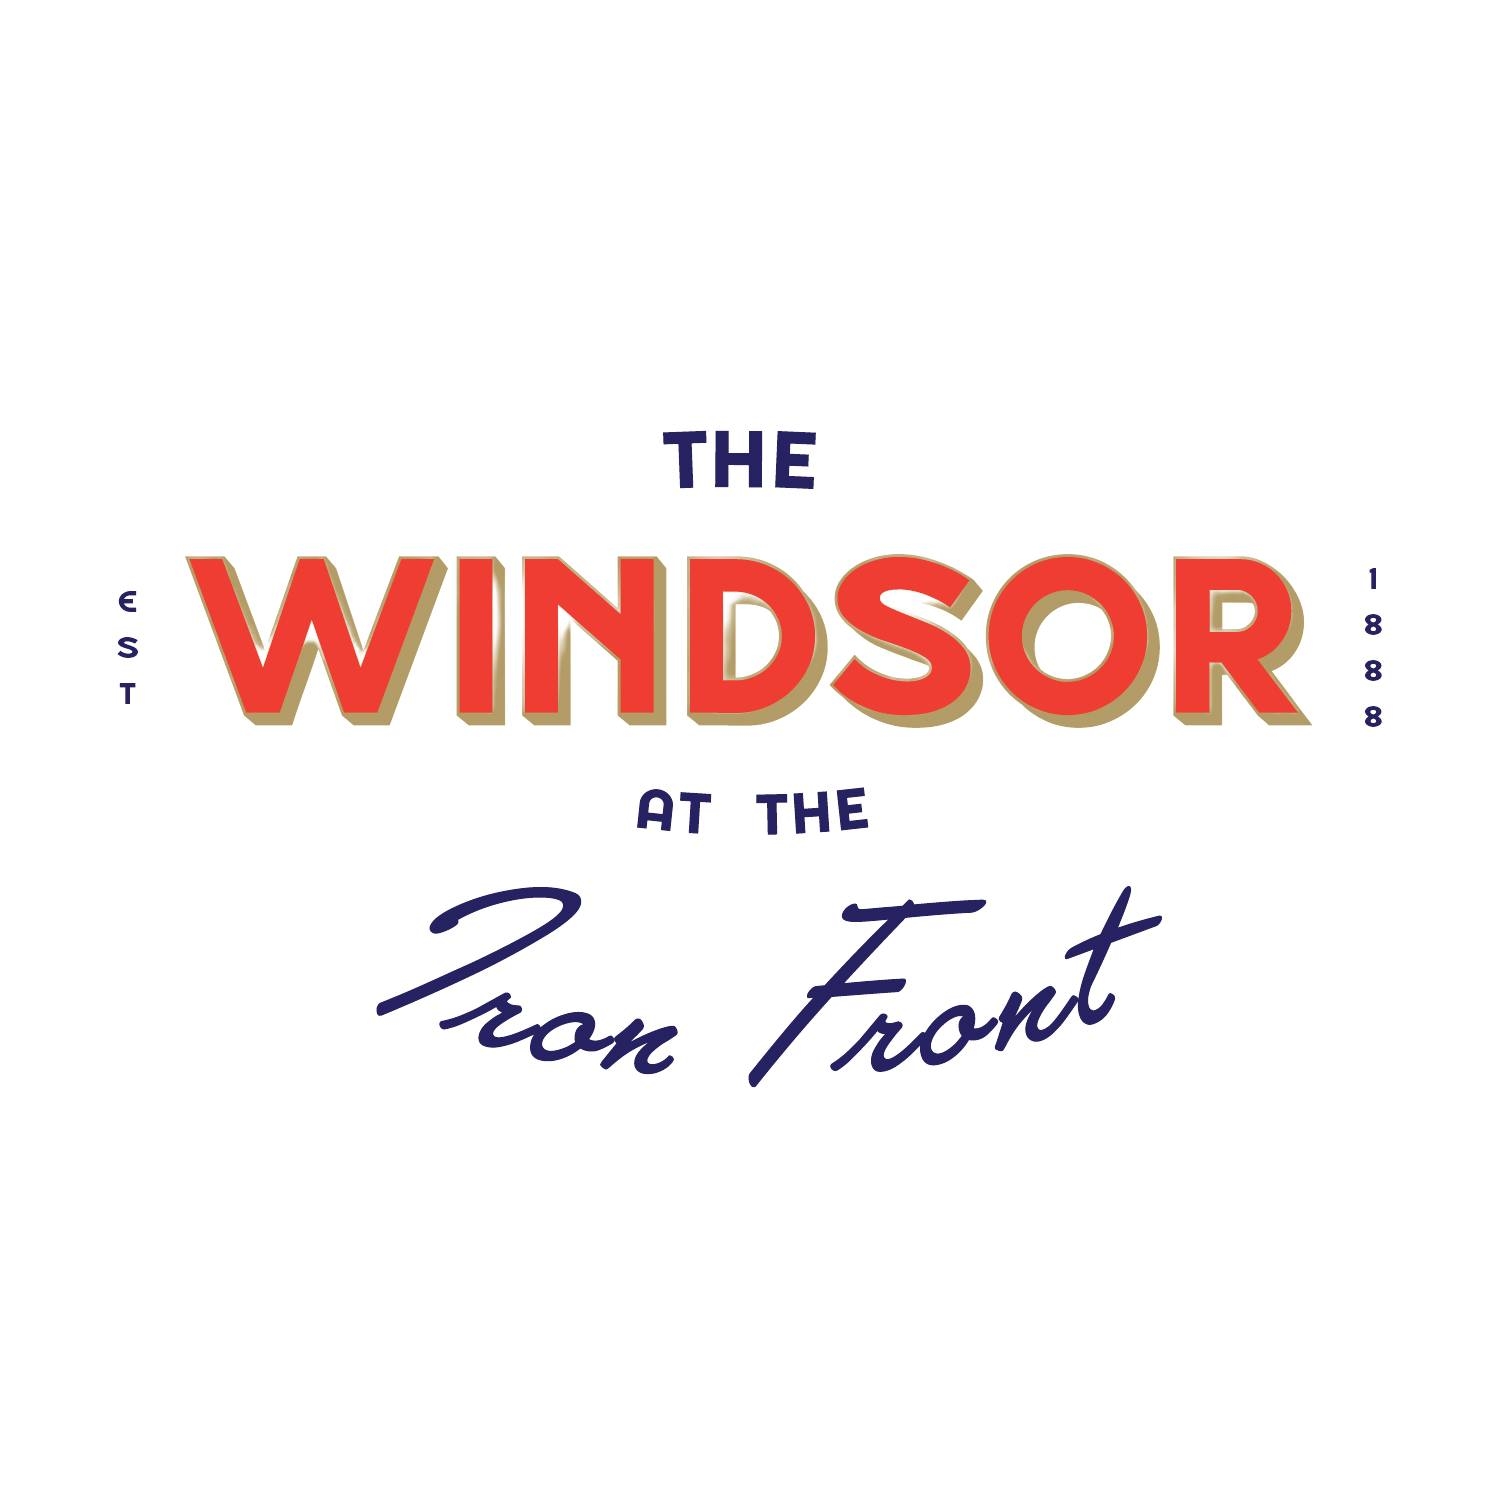 The Windsor at the Iron Front